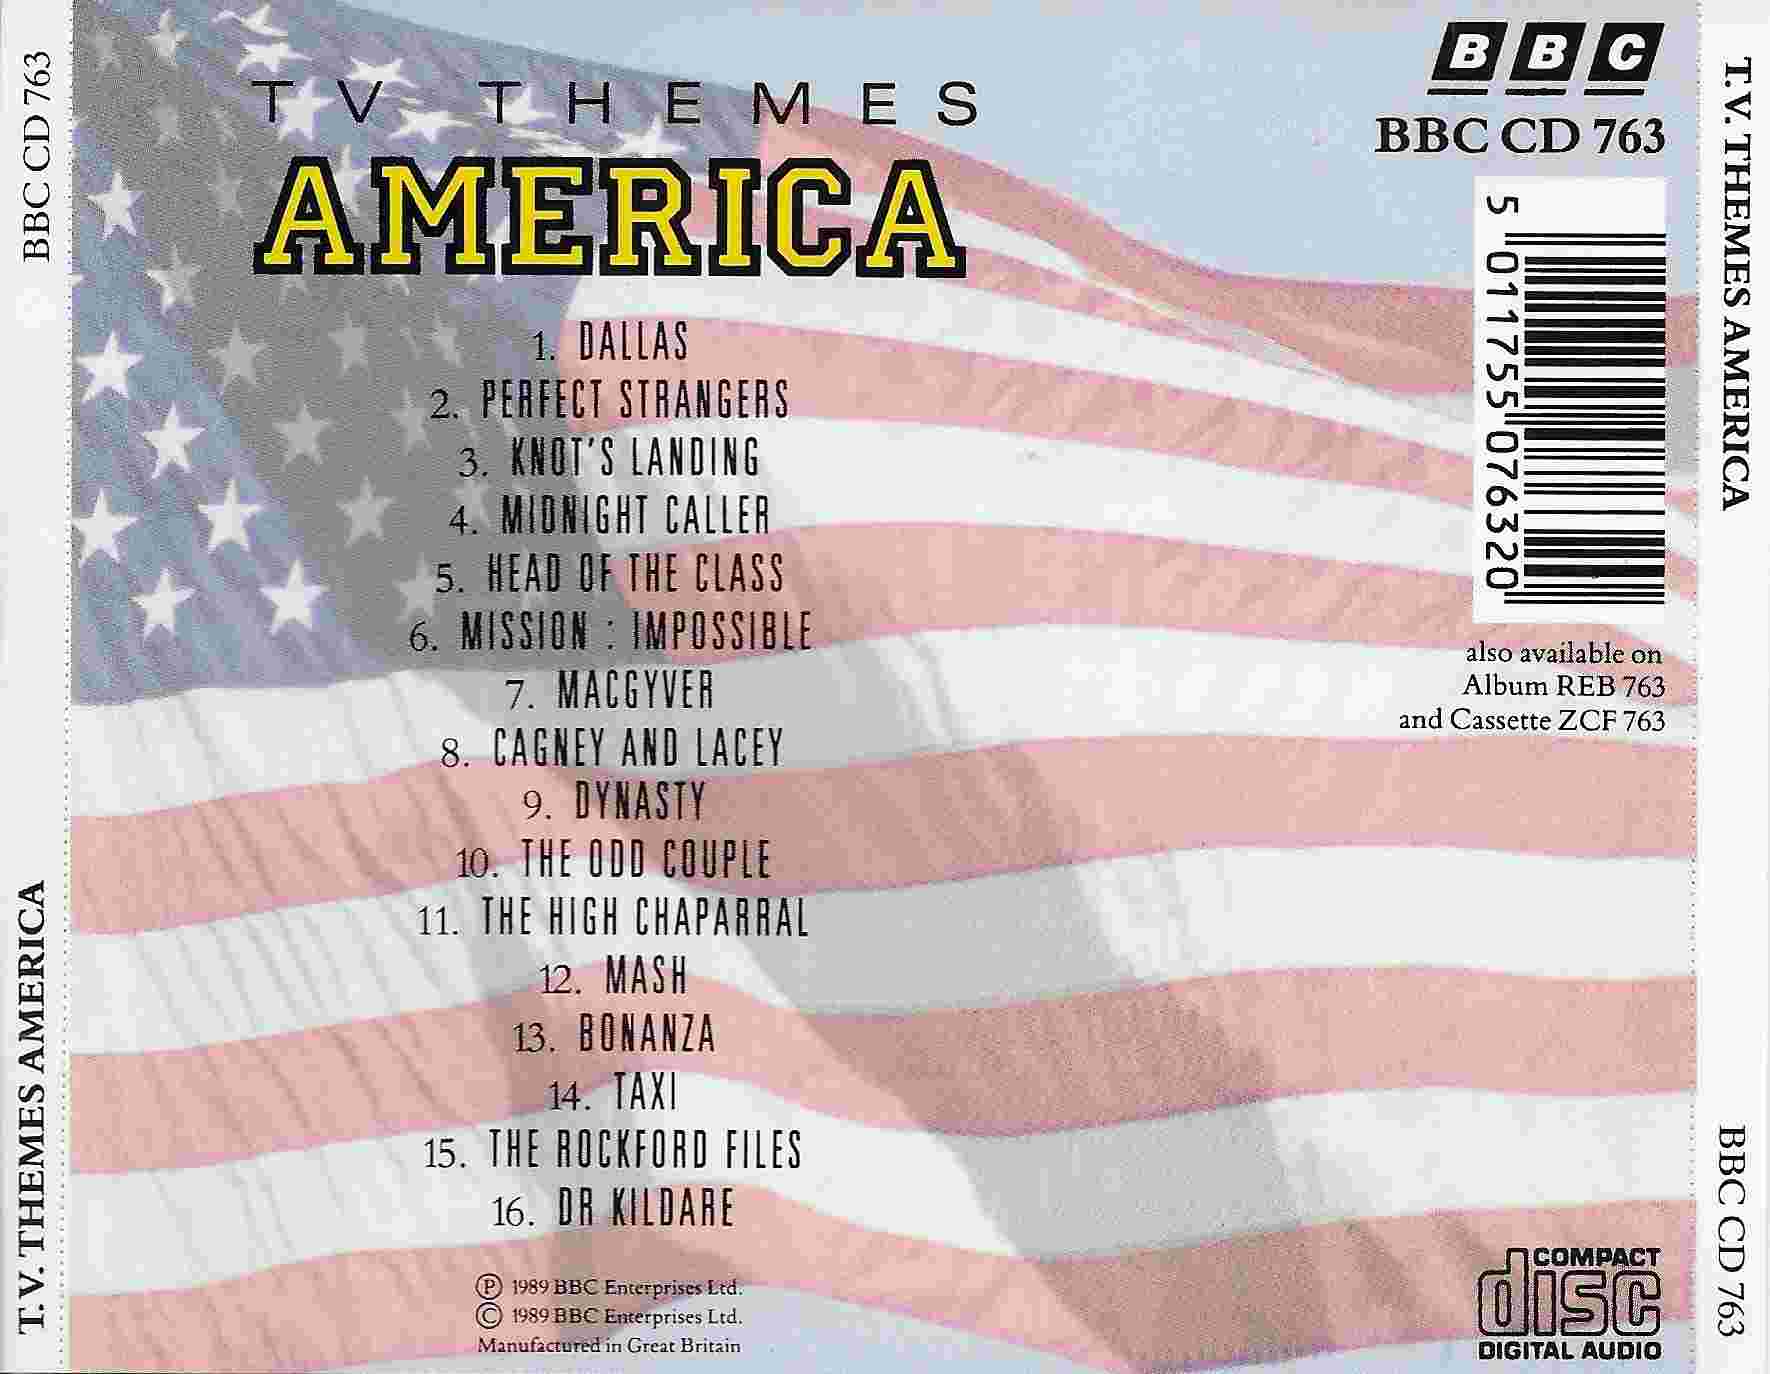 Picture of BBCCD763 TV themes - America by artist Various from the BBC records and Tapes library